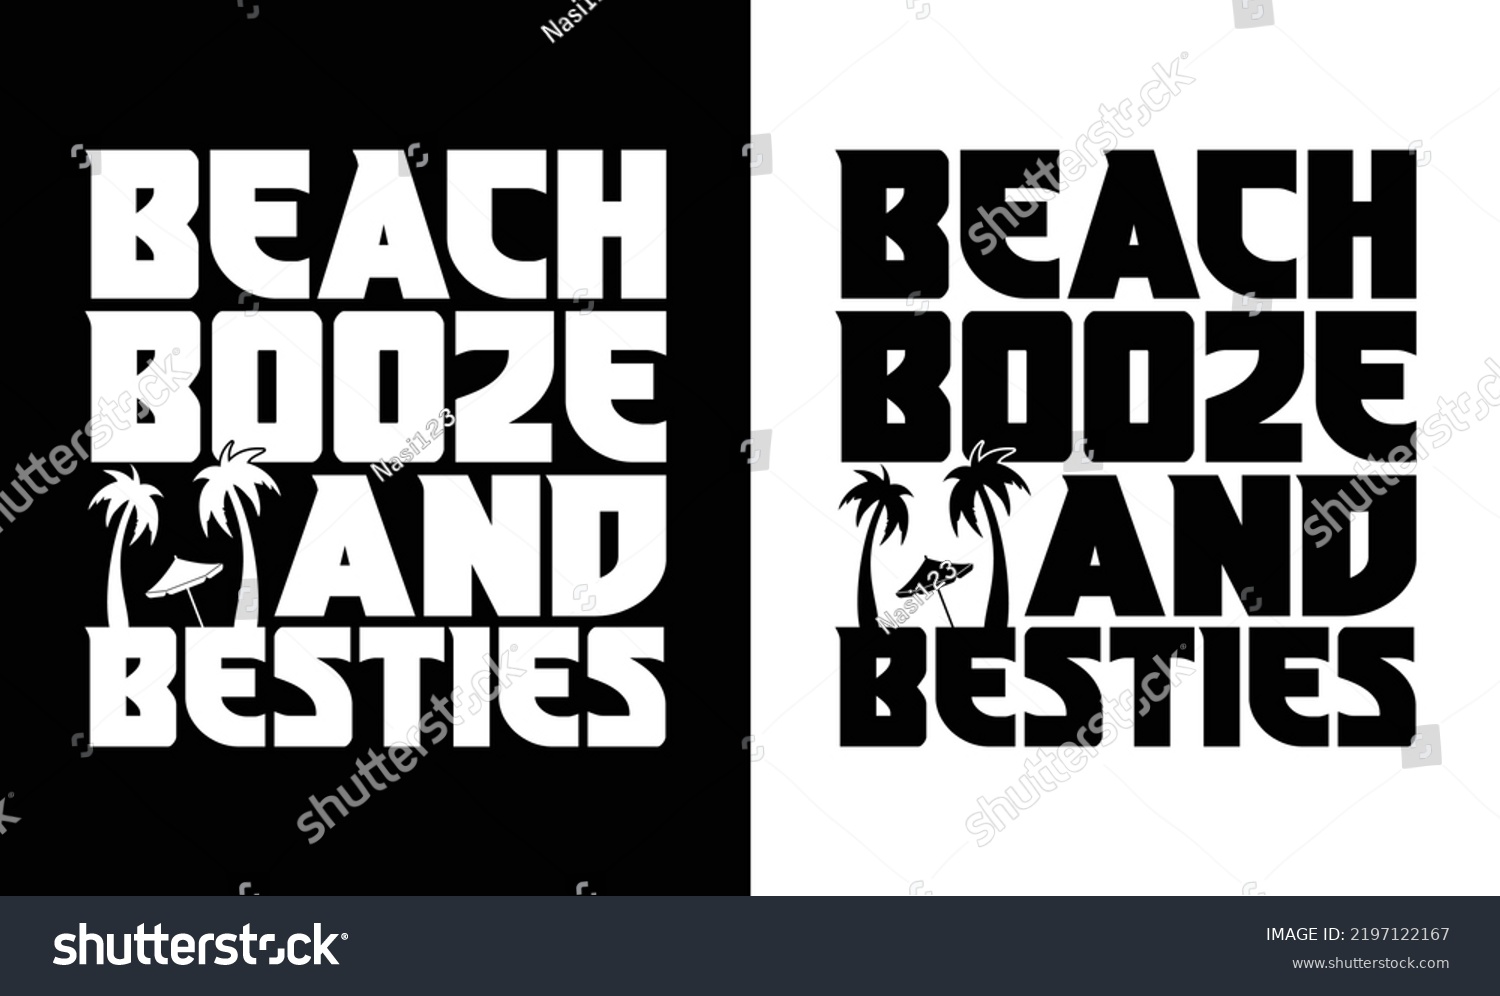 SVG of Beaches Booze and Besties Summer Quote T shirt design svg